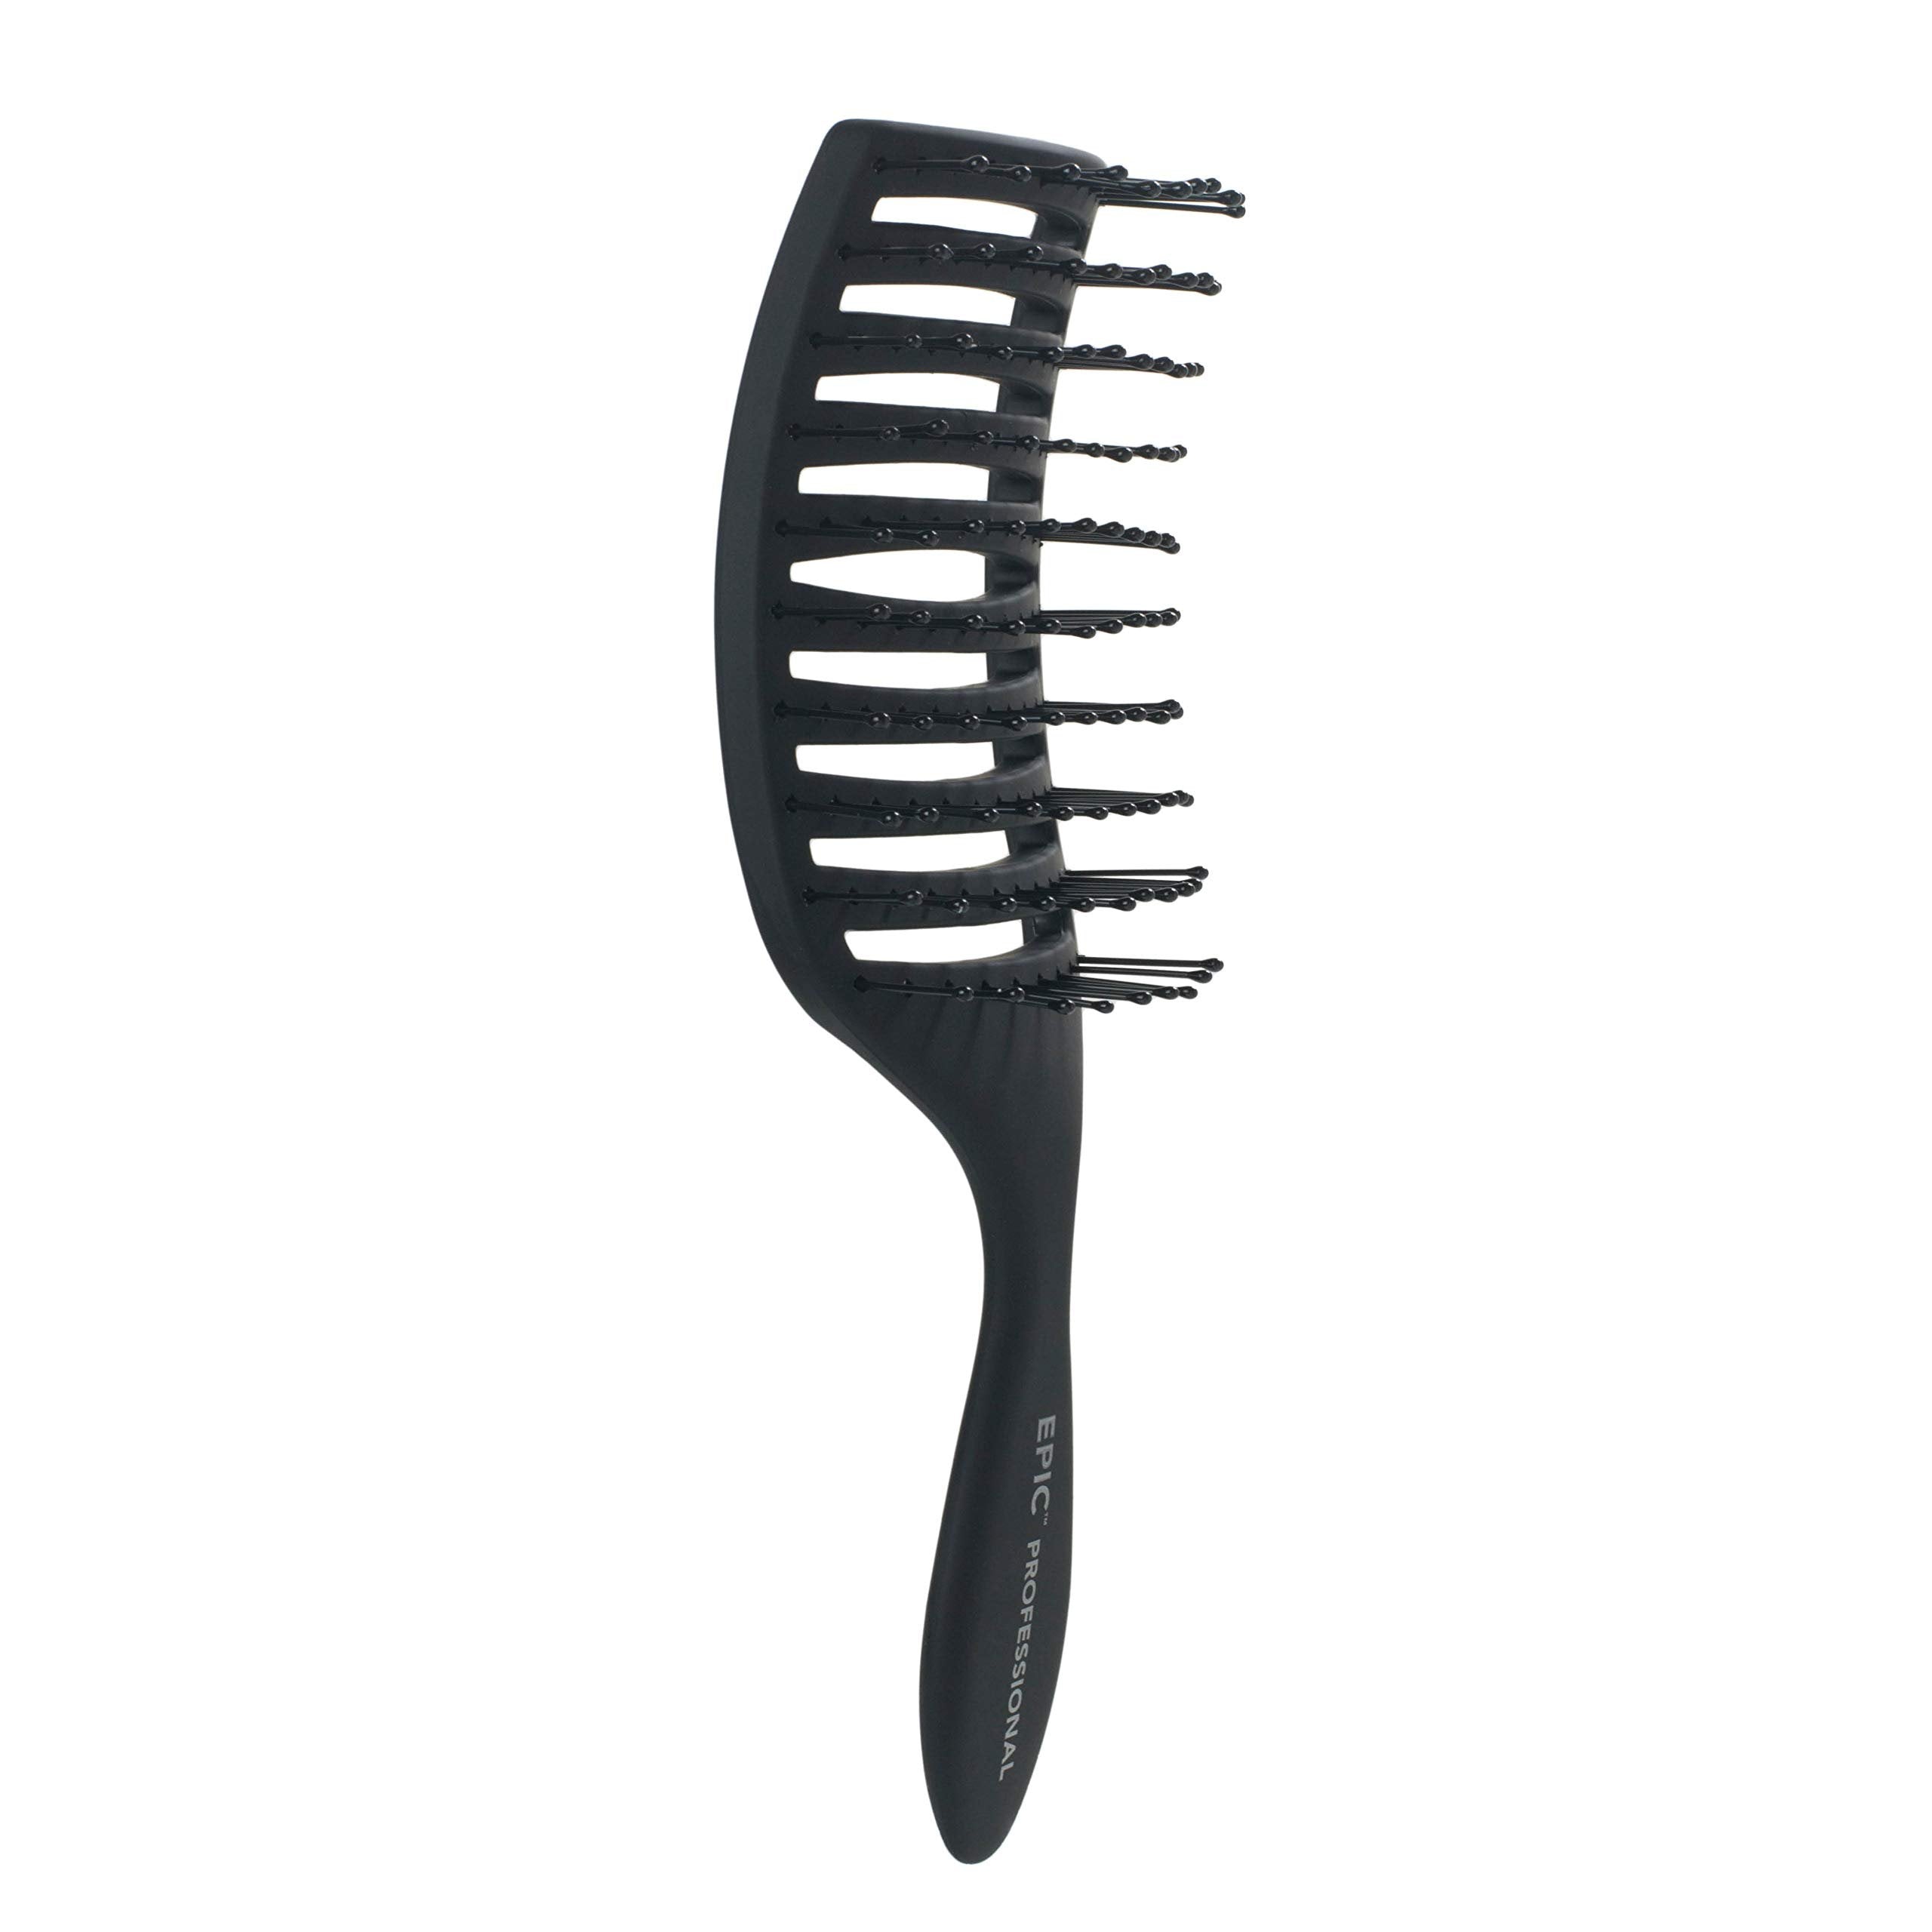 Epic Professional Quick Dry Hair Brush, Black, Size 1 – Free Shipping & Returns